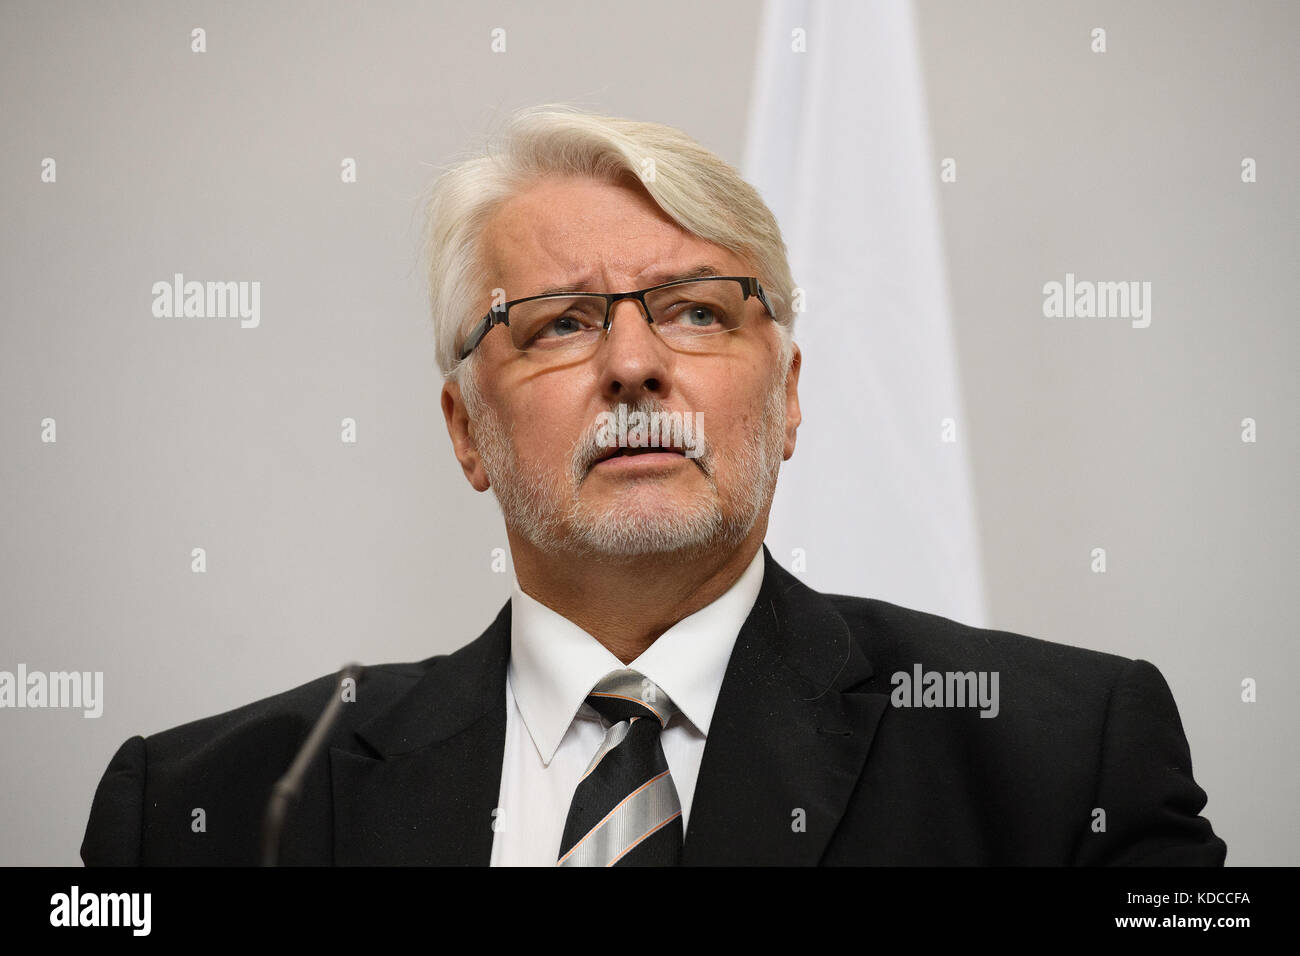 Poland's Foreign Minister Witold Waszczykowksi, during a joint press conference with Foreign Secretary Boris Johnson, Defence Secretary Sir Michael Fallon and Polish Defence Minister Antoni Macierewicz, at the Foreign & Commonwealth Office in London. Stock Photo